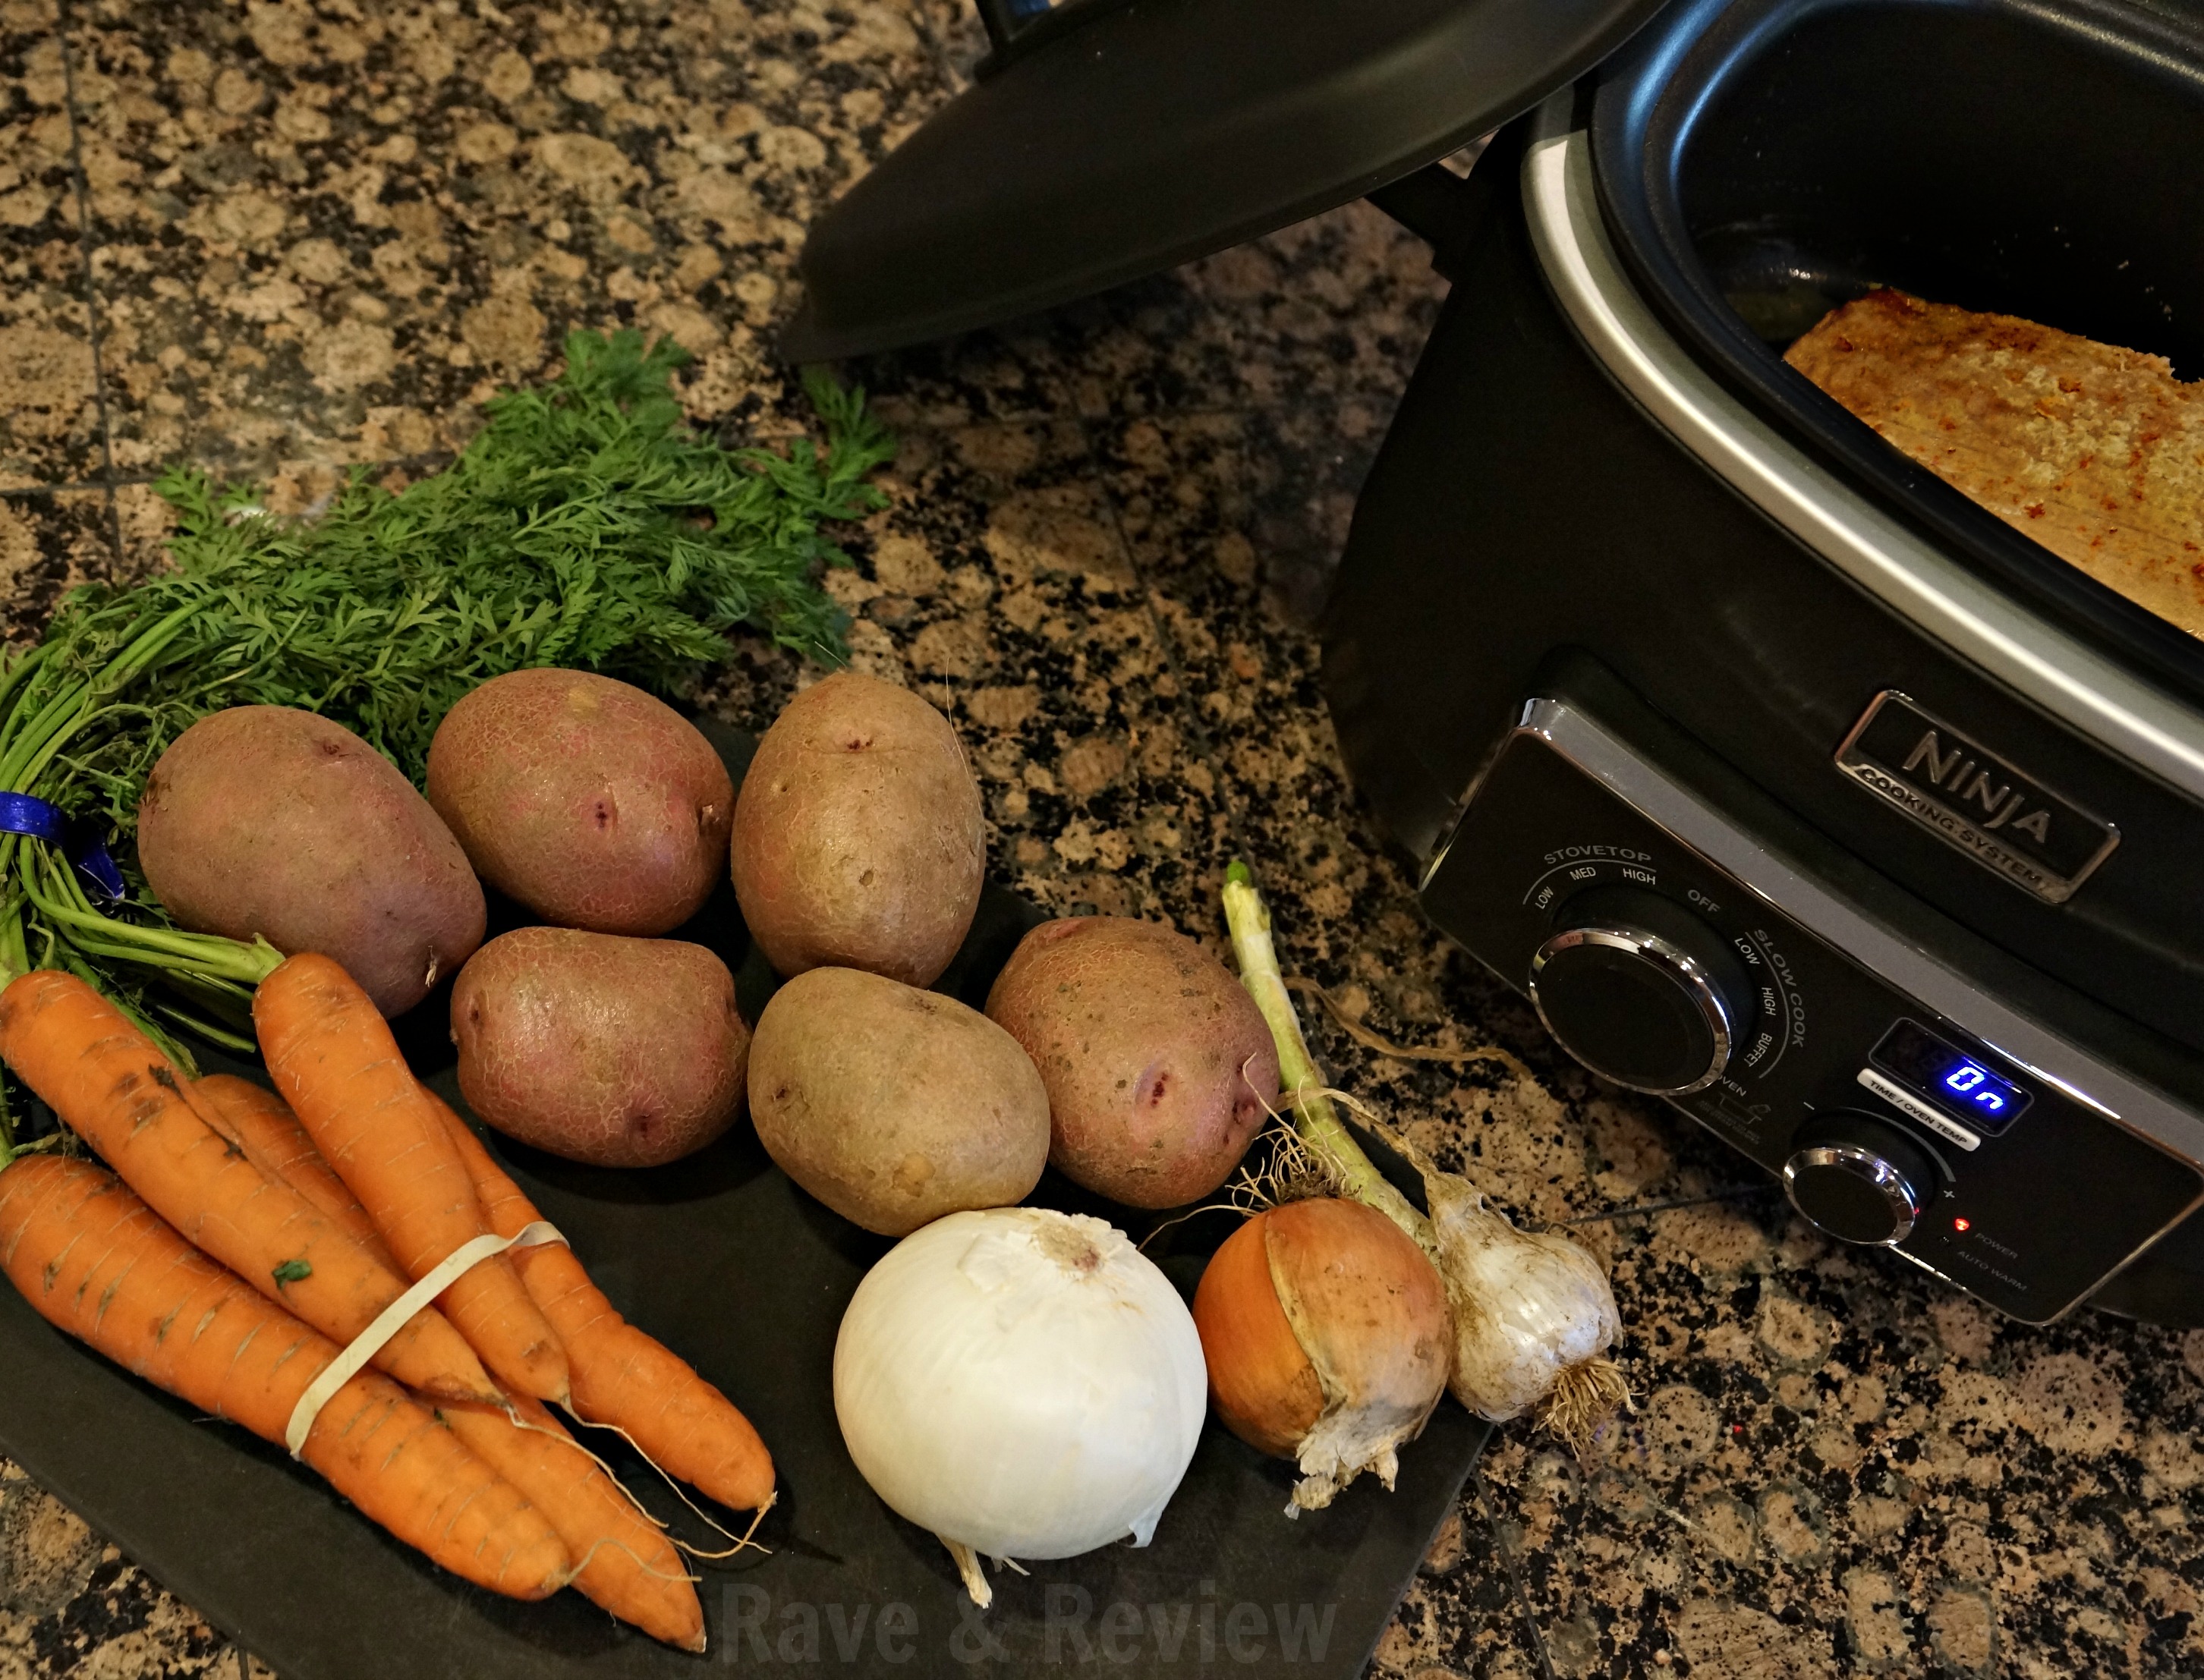 Ninja 3-in-1 Cooking System #Review and Pot Roast #Recipe